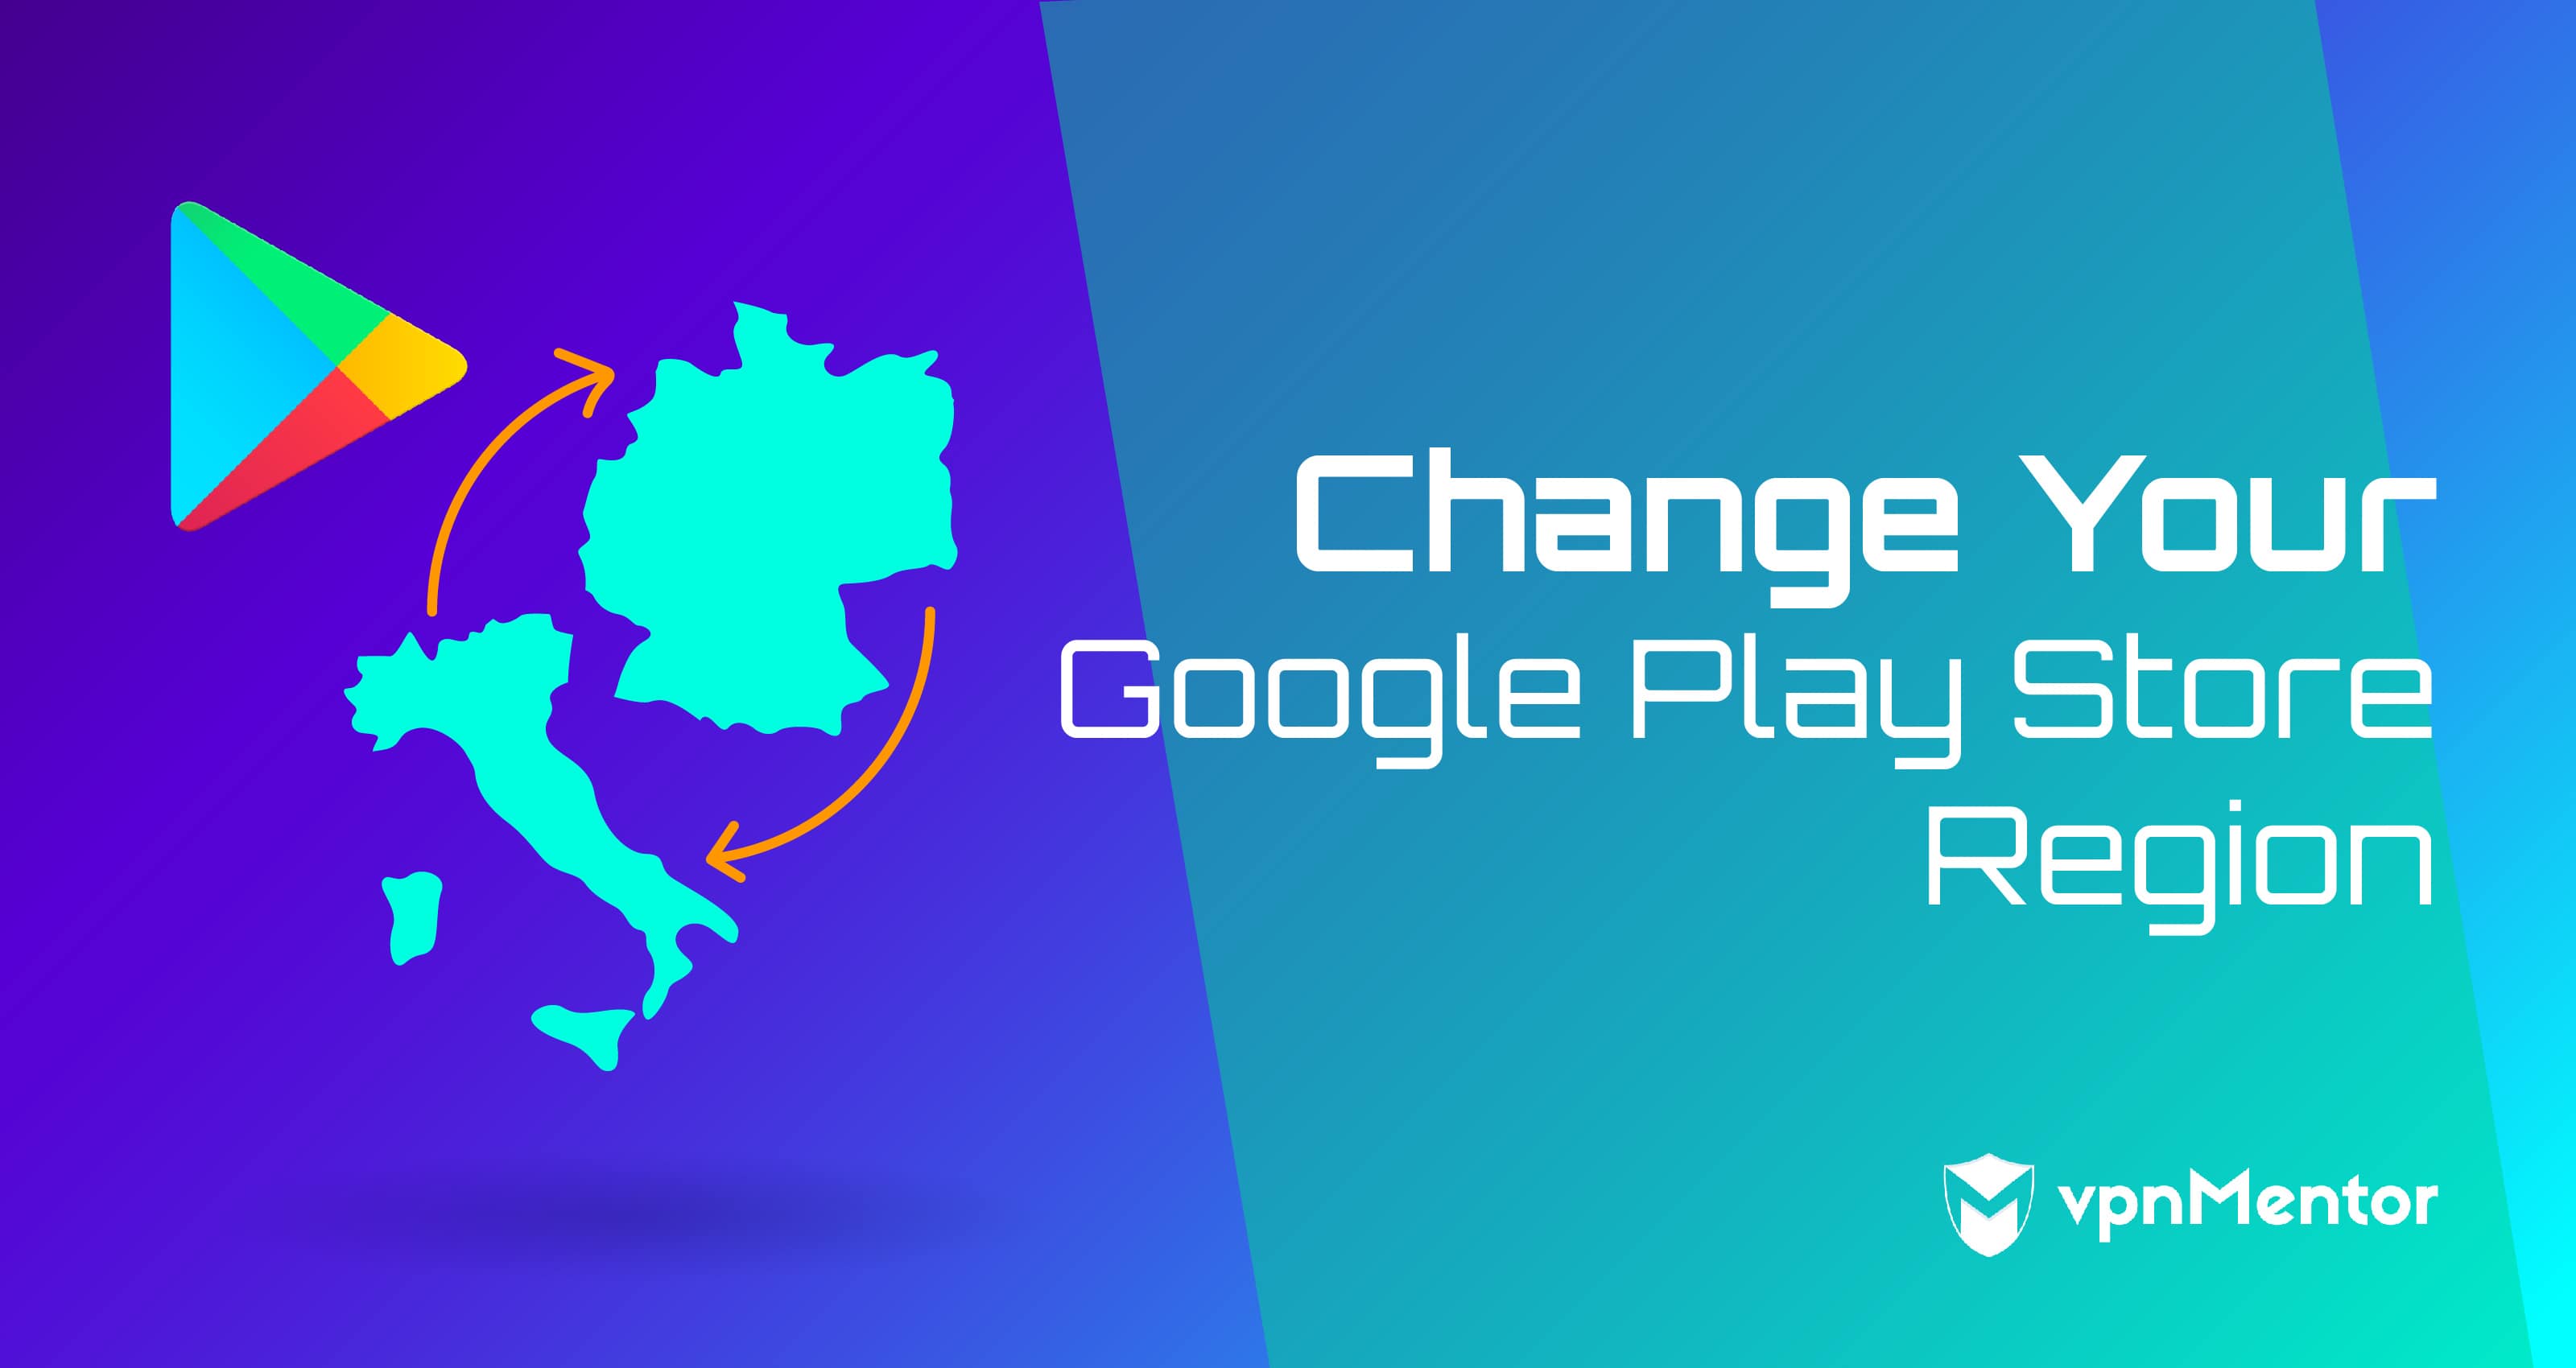 Change Your Google Play Store Region